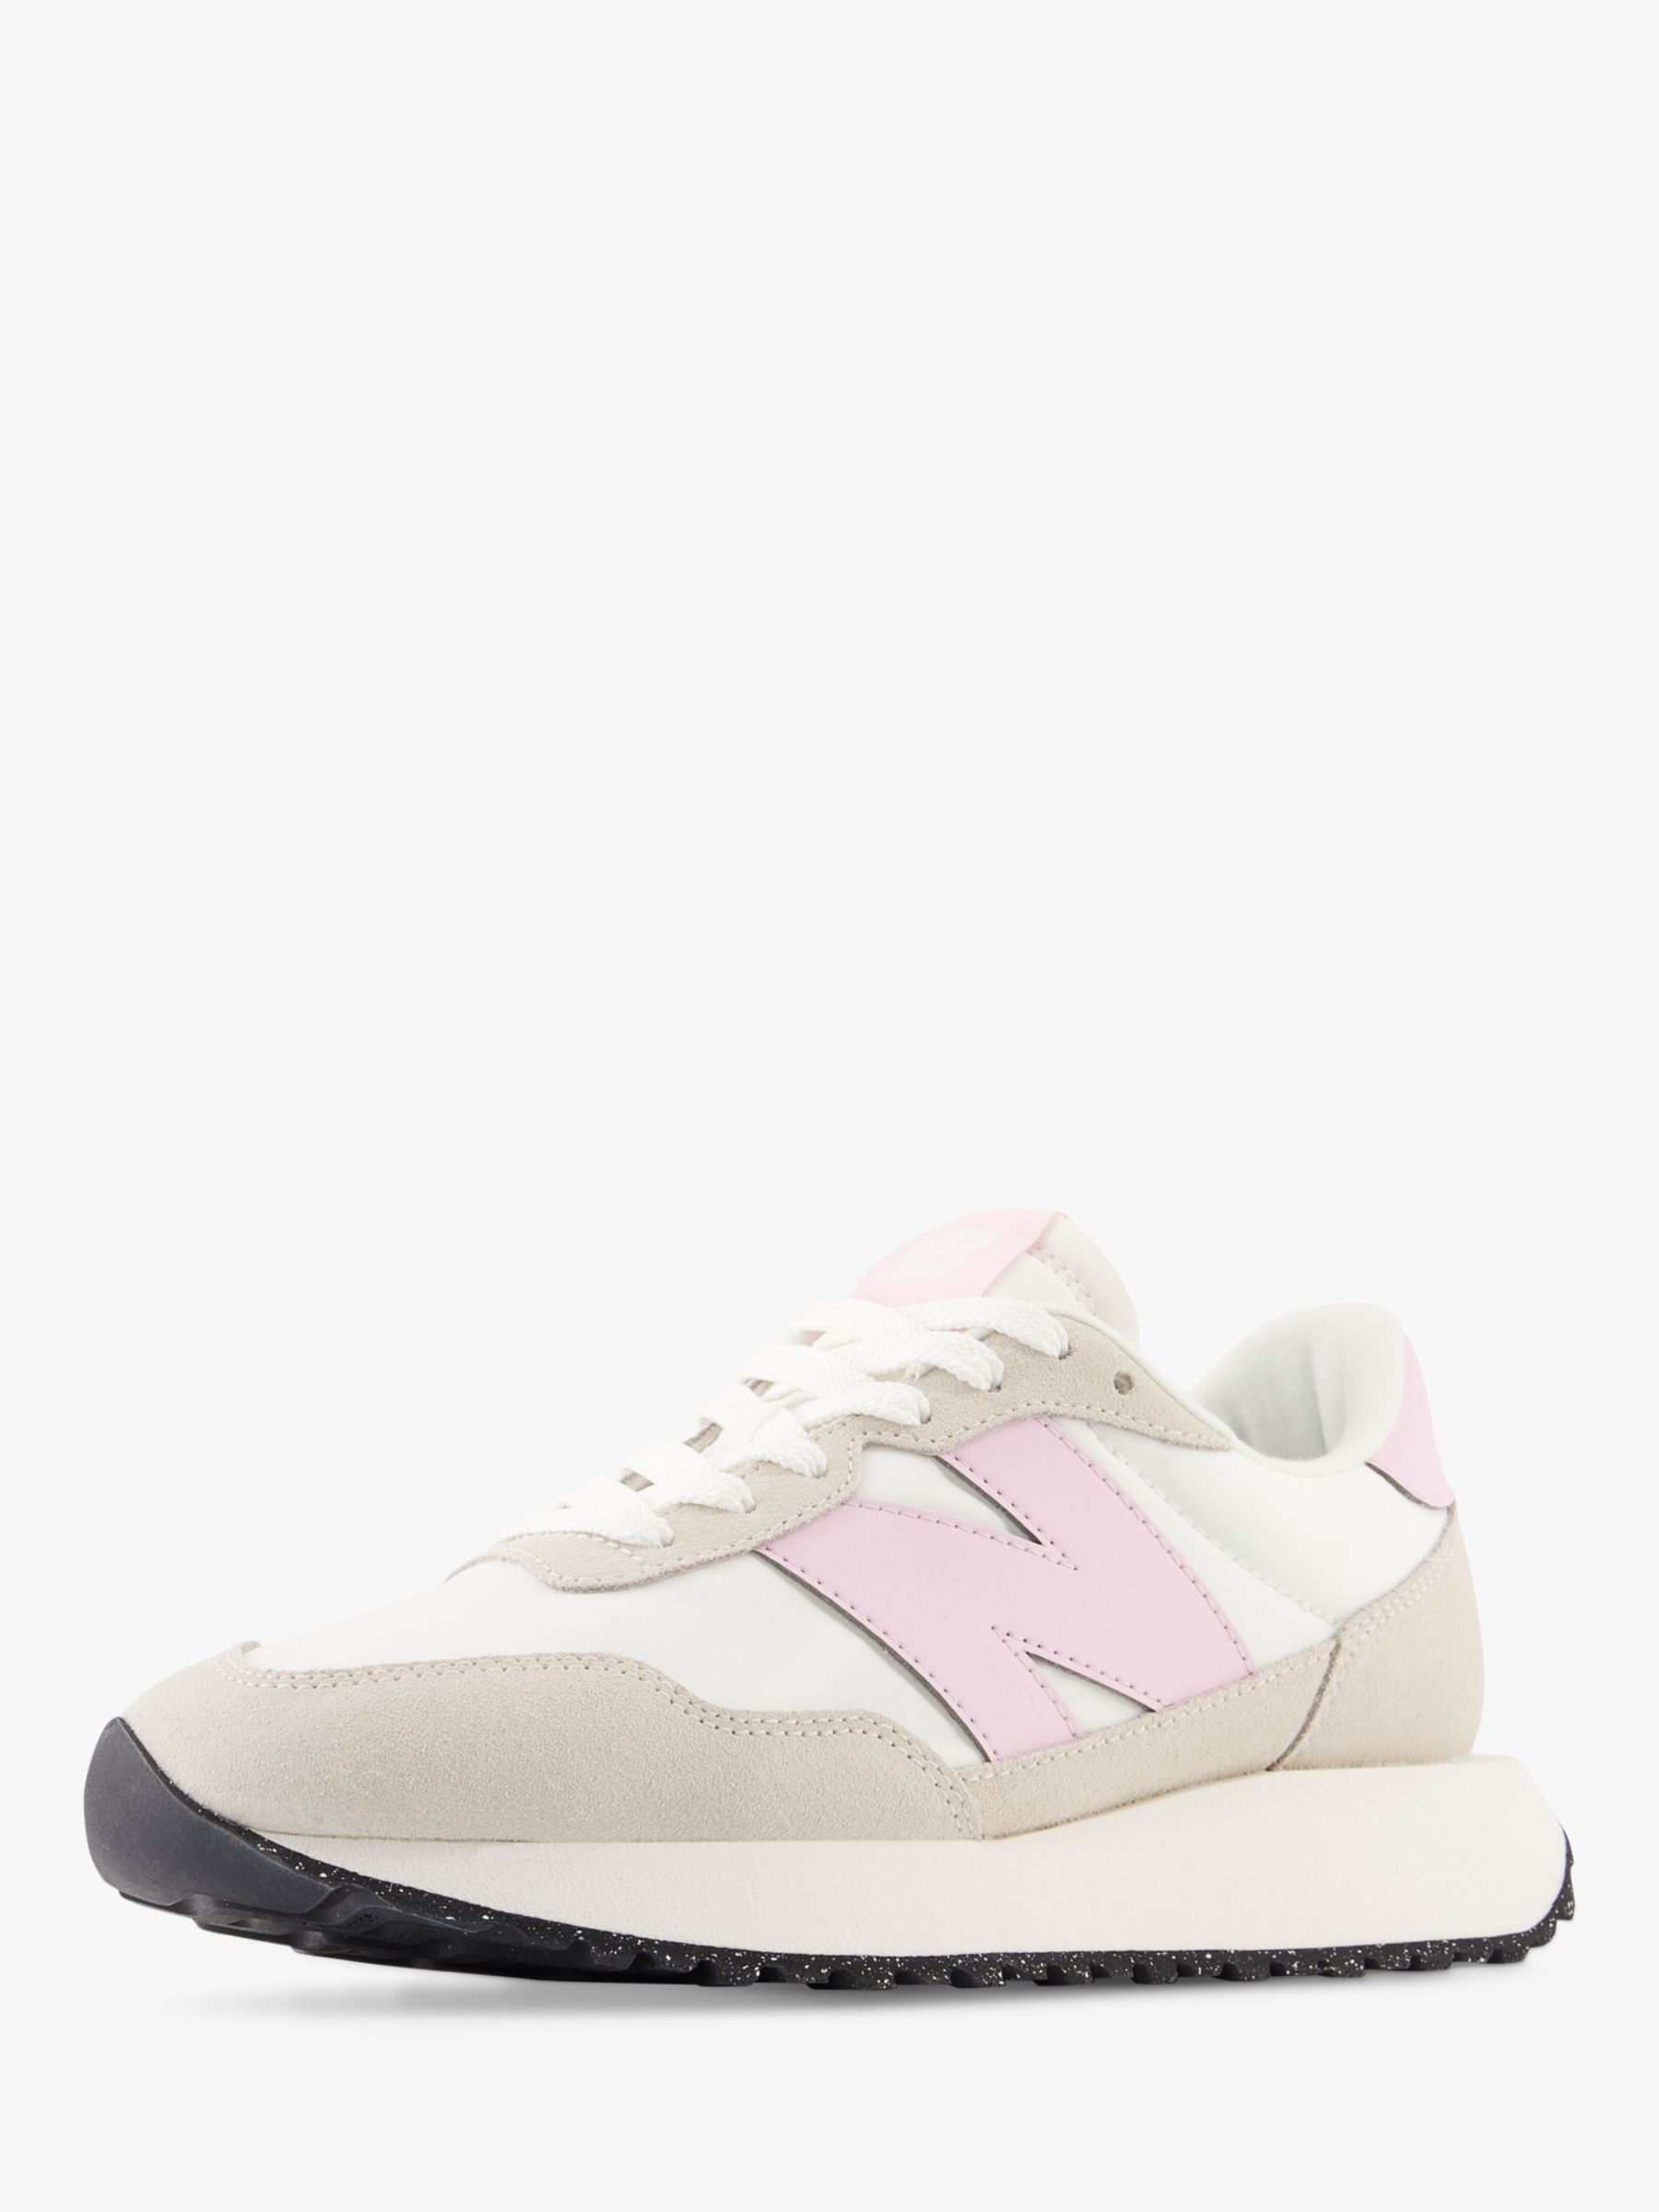 New Balance 237 Suede Mesh Trainers, White/Pink, 6